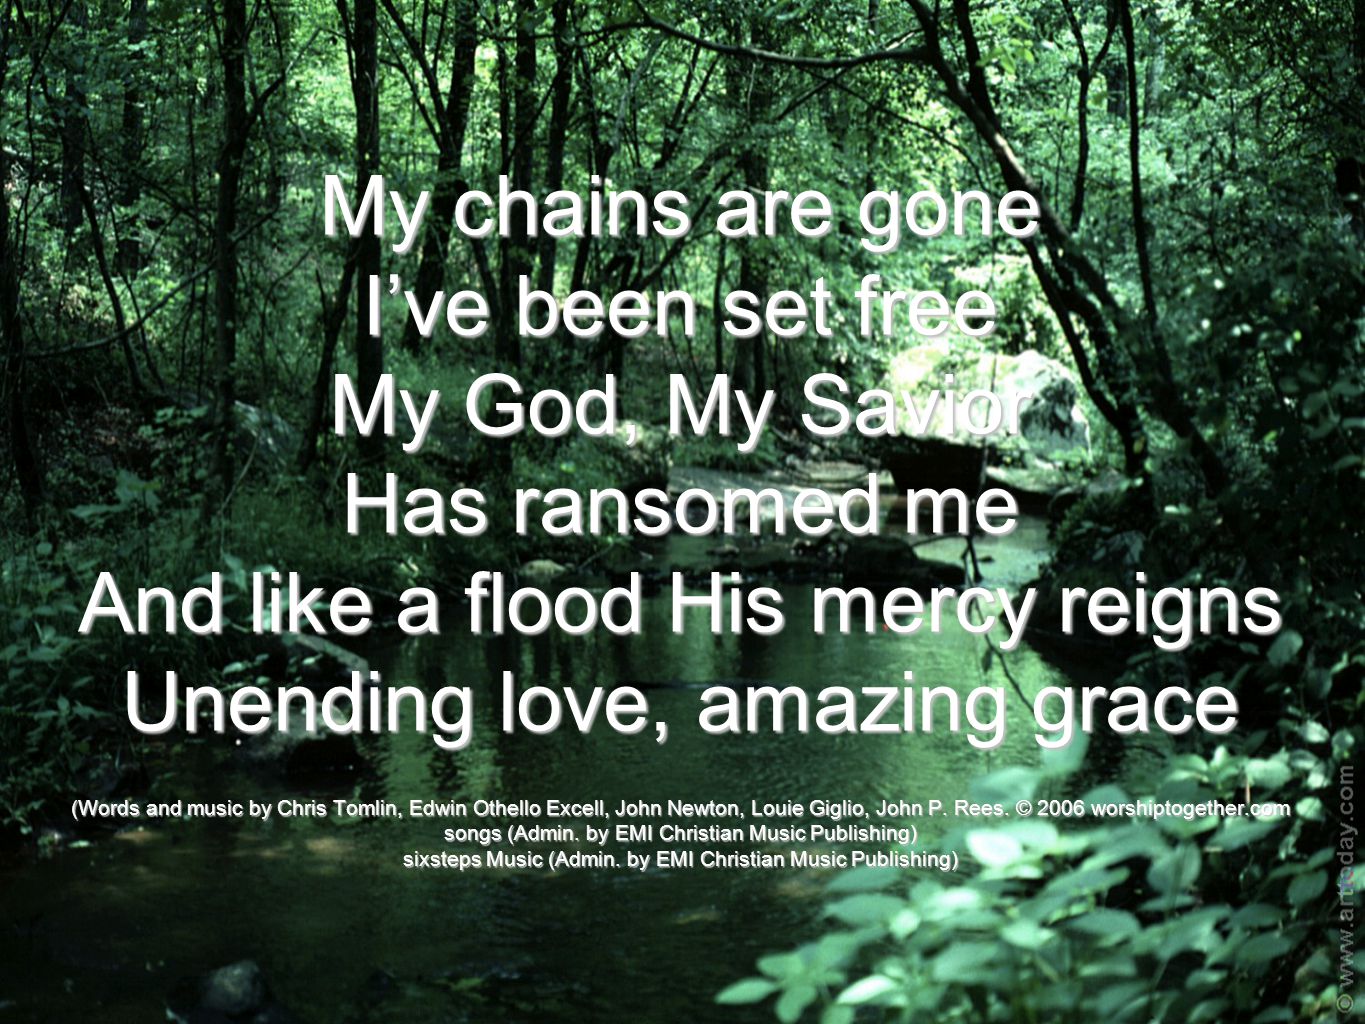 My chains are gone I’ve been set free My God, My Savior Has ransomed me And like a flood His mercy reigns Unending love, amazing grace (Words and music by Chris Tomlin, Edwin Othello Excell, John Newton, Louie Giglio, John P.